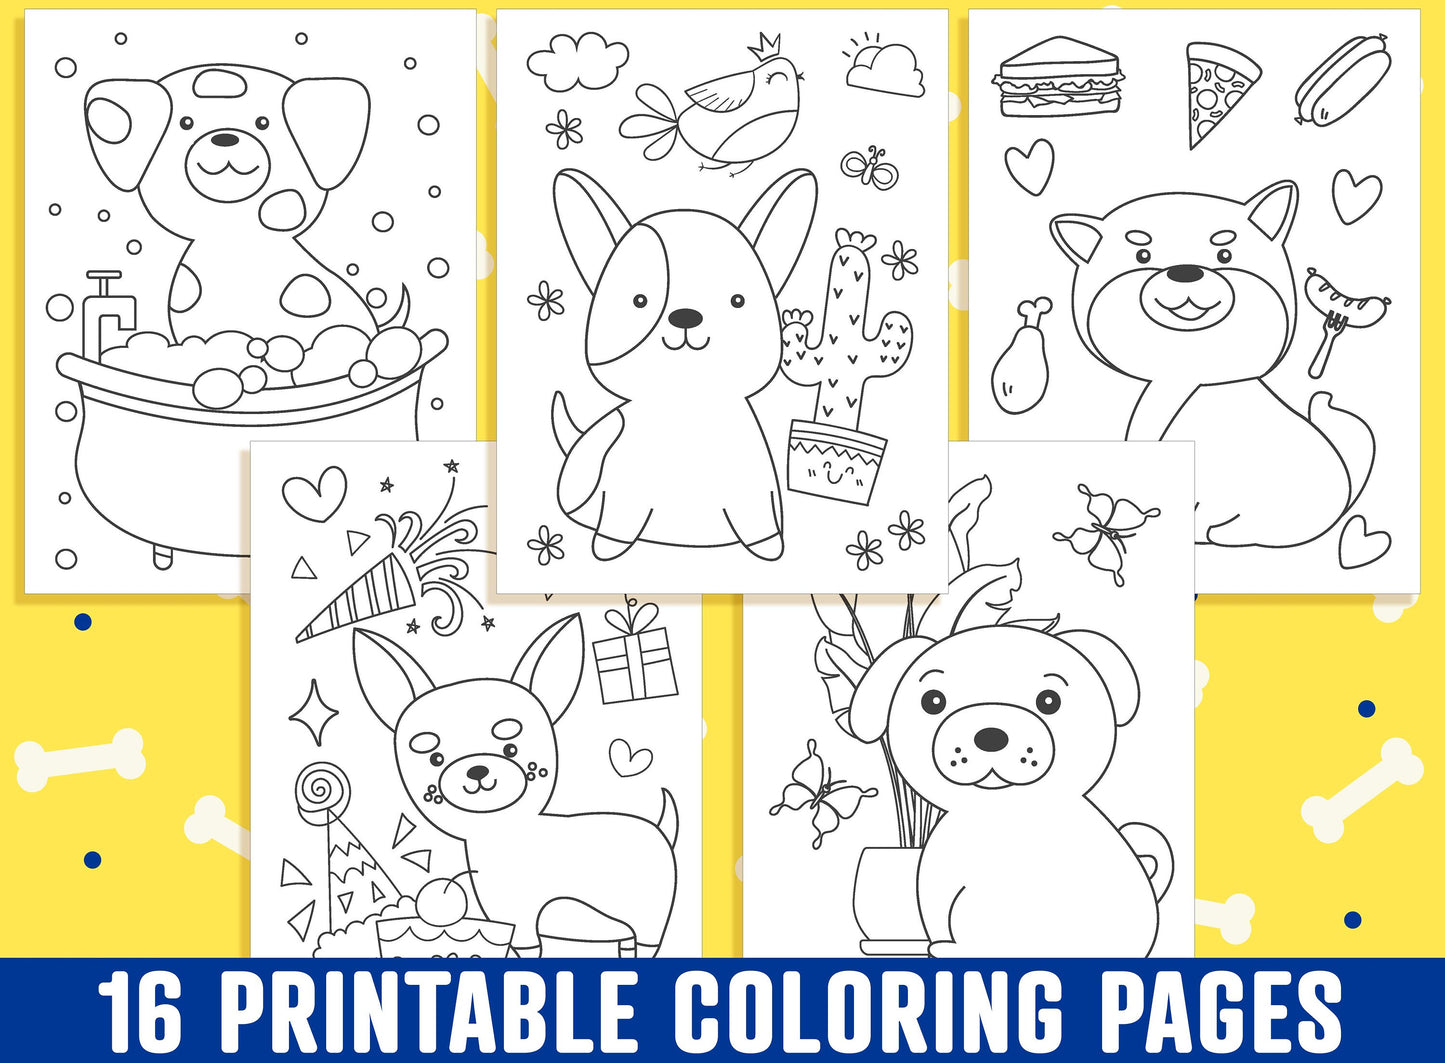 Dog Coloring Pages - 16 Printable Dog Coloring Pages for Kids, Boys, Girls, Teens, Dog/Puppy Birthday Party Activity, PDF, Instant Download.